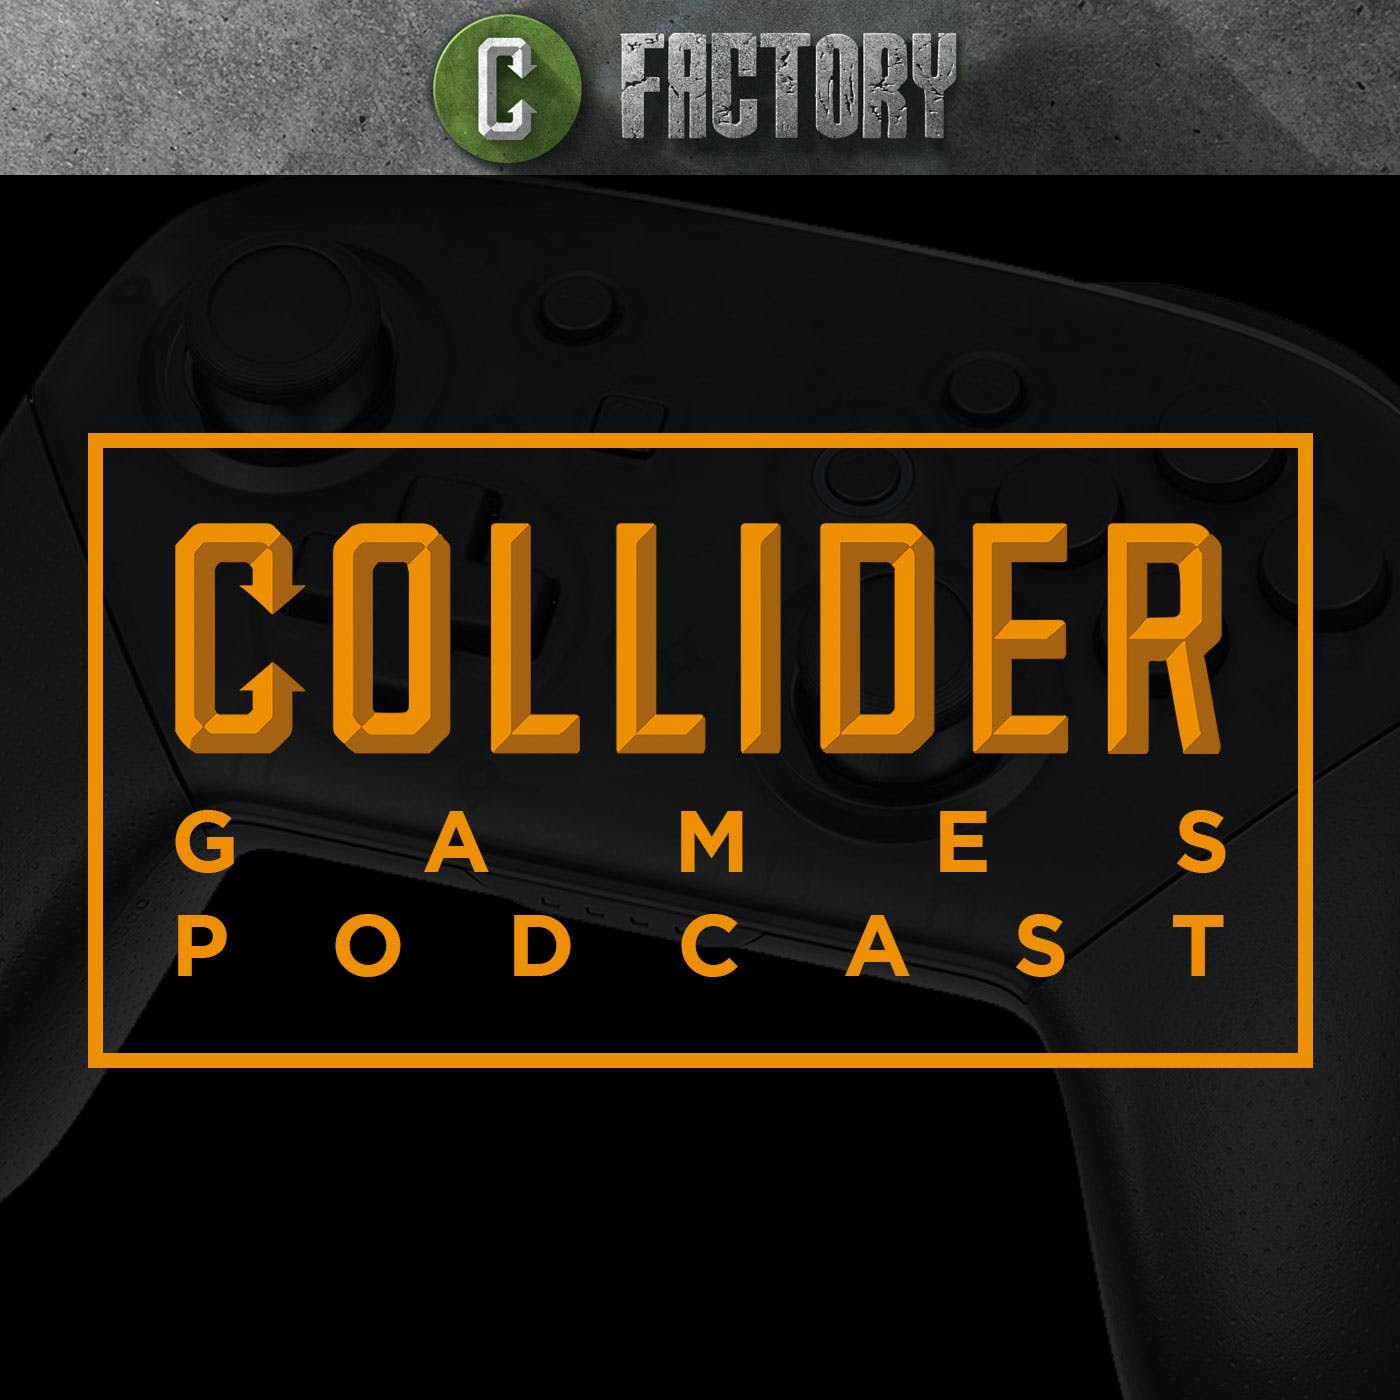 Is the Last of Us Part 2 Backlash Warranted? - Collider Games Podcast